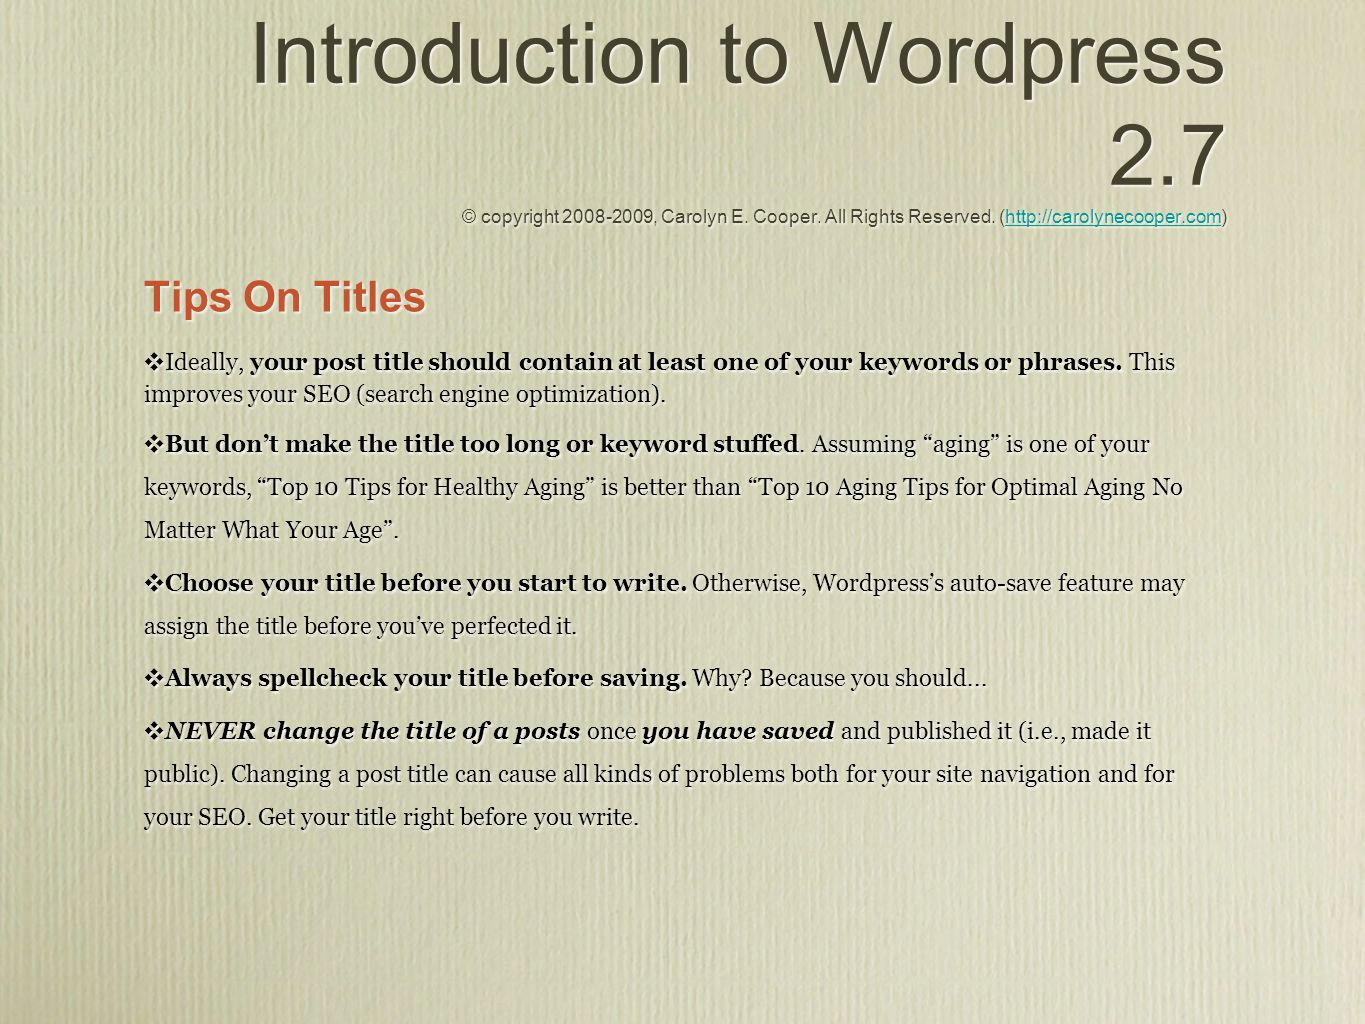 Introduction to WordPress 2.7 The Basics of How To Add and Edit Posts, Pages and Blogrolls/Links (with SEO tips) - ppt download - 웹